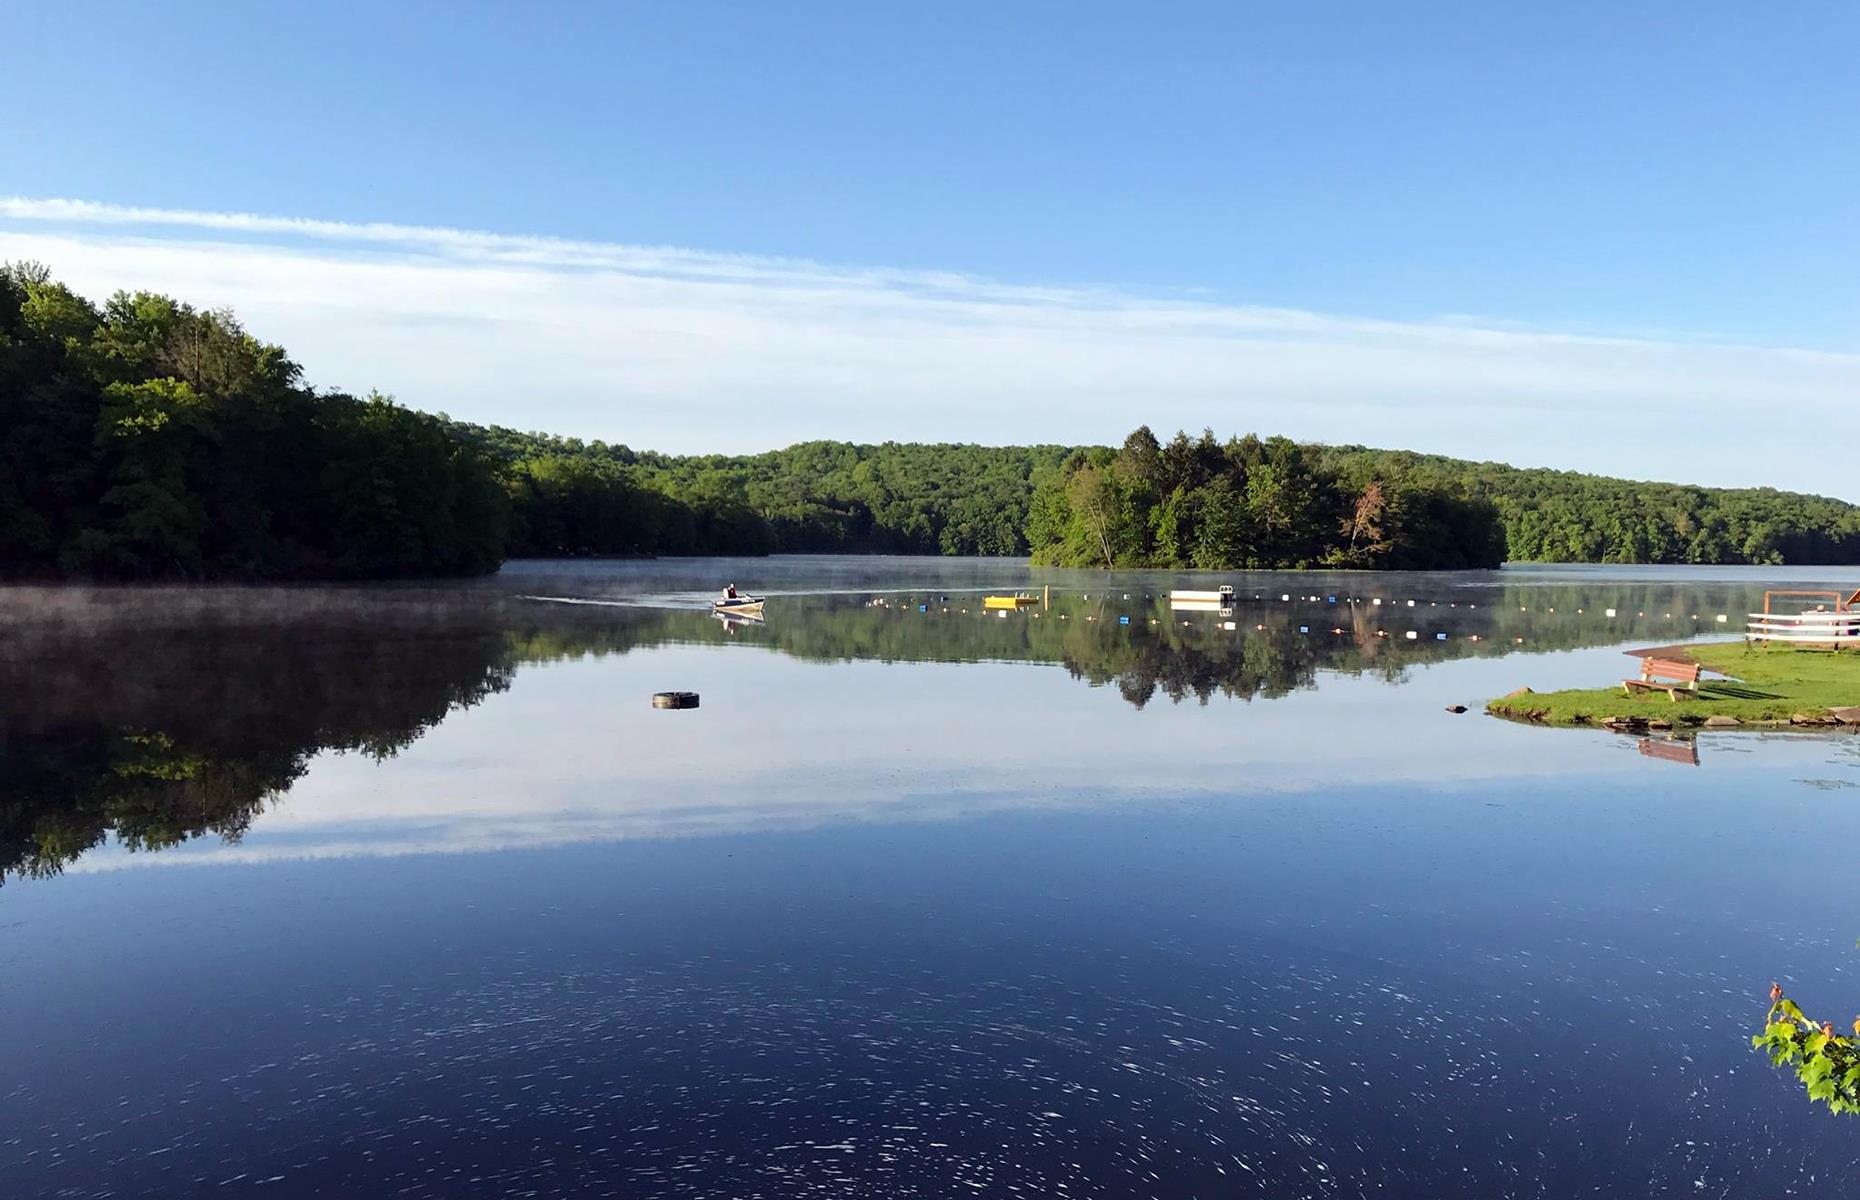 <p>Family-owned <a href="https://keenlake.com/">Keen Lake Camping</a> has been running since 1954. The site has an enviable spot in the Poconos Mountains, plus a vast, rippleless lake popular for paddle-boarding, aqua-cycling and rowing, and a sandy beach. Typically there are group games organized for the kids and also artsy activities such as ceramics classes (<a href="https://keenlake.com/announcements/">a full statement on the website</a> details what's currently available). There are full hook-up sites right by the water's edge too. </p>